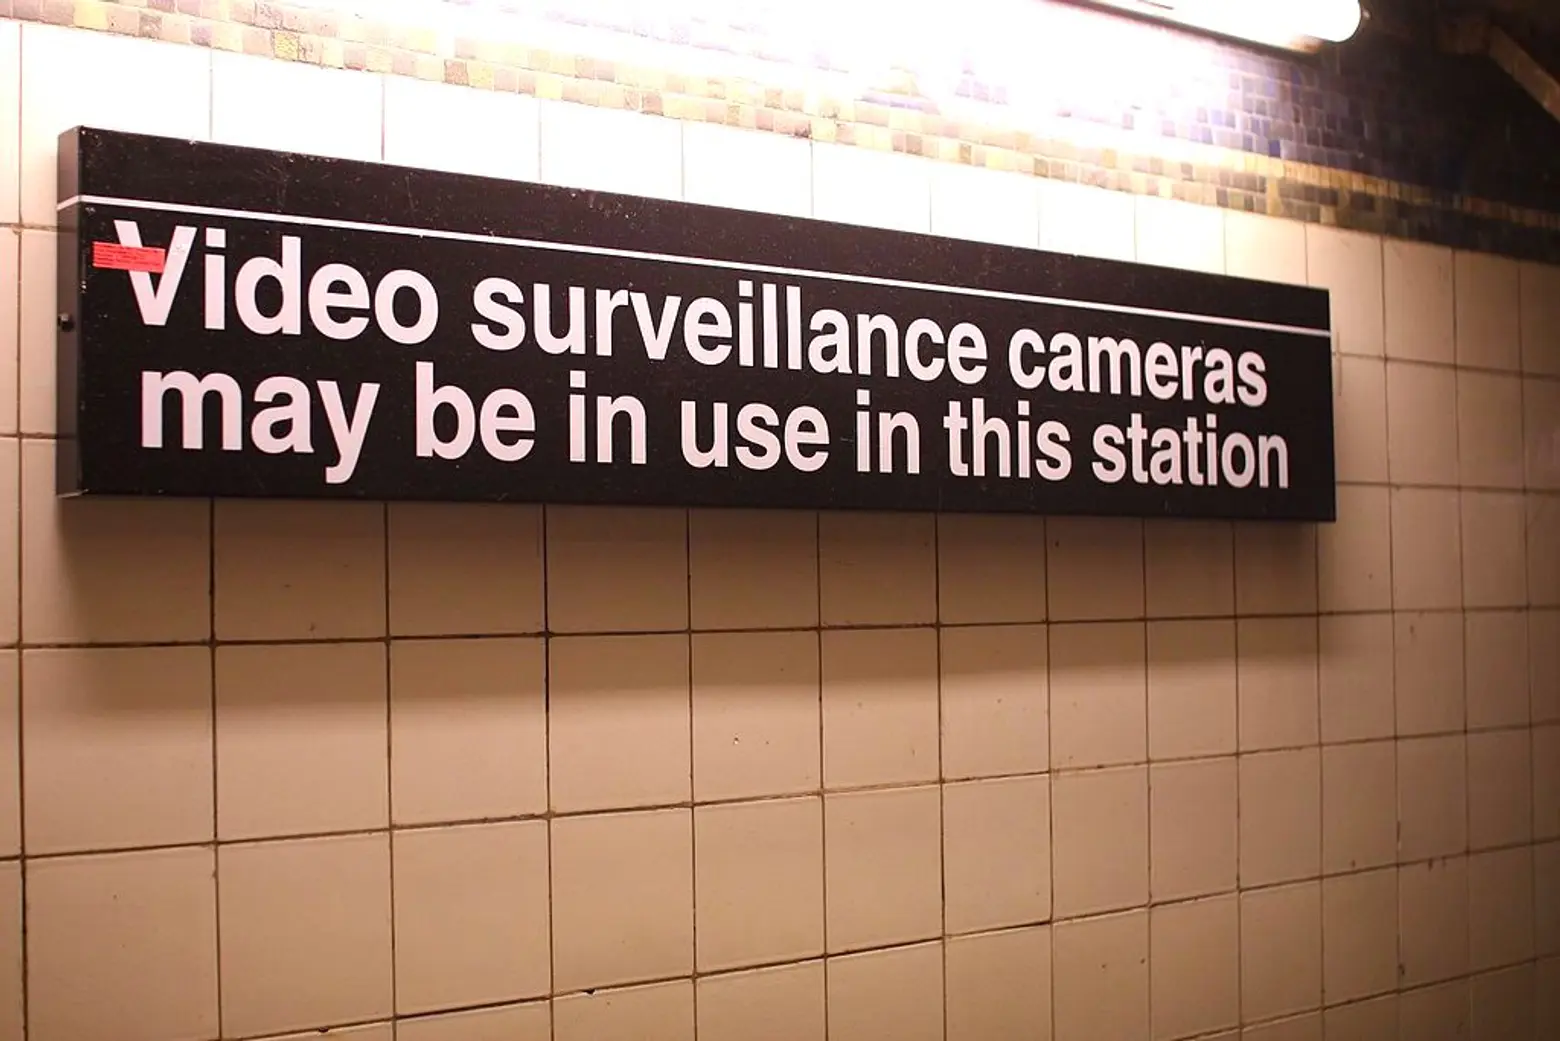 NYPD will now monitor homeless New Yorkers 24/7 at some subway stations: report